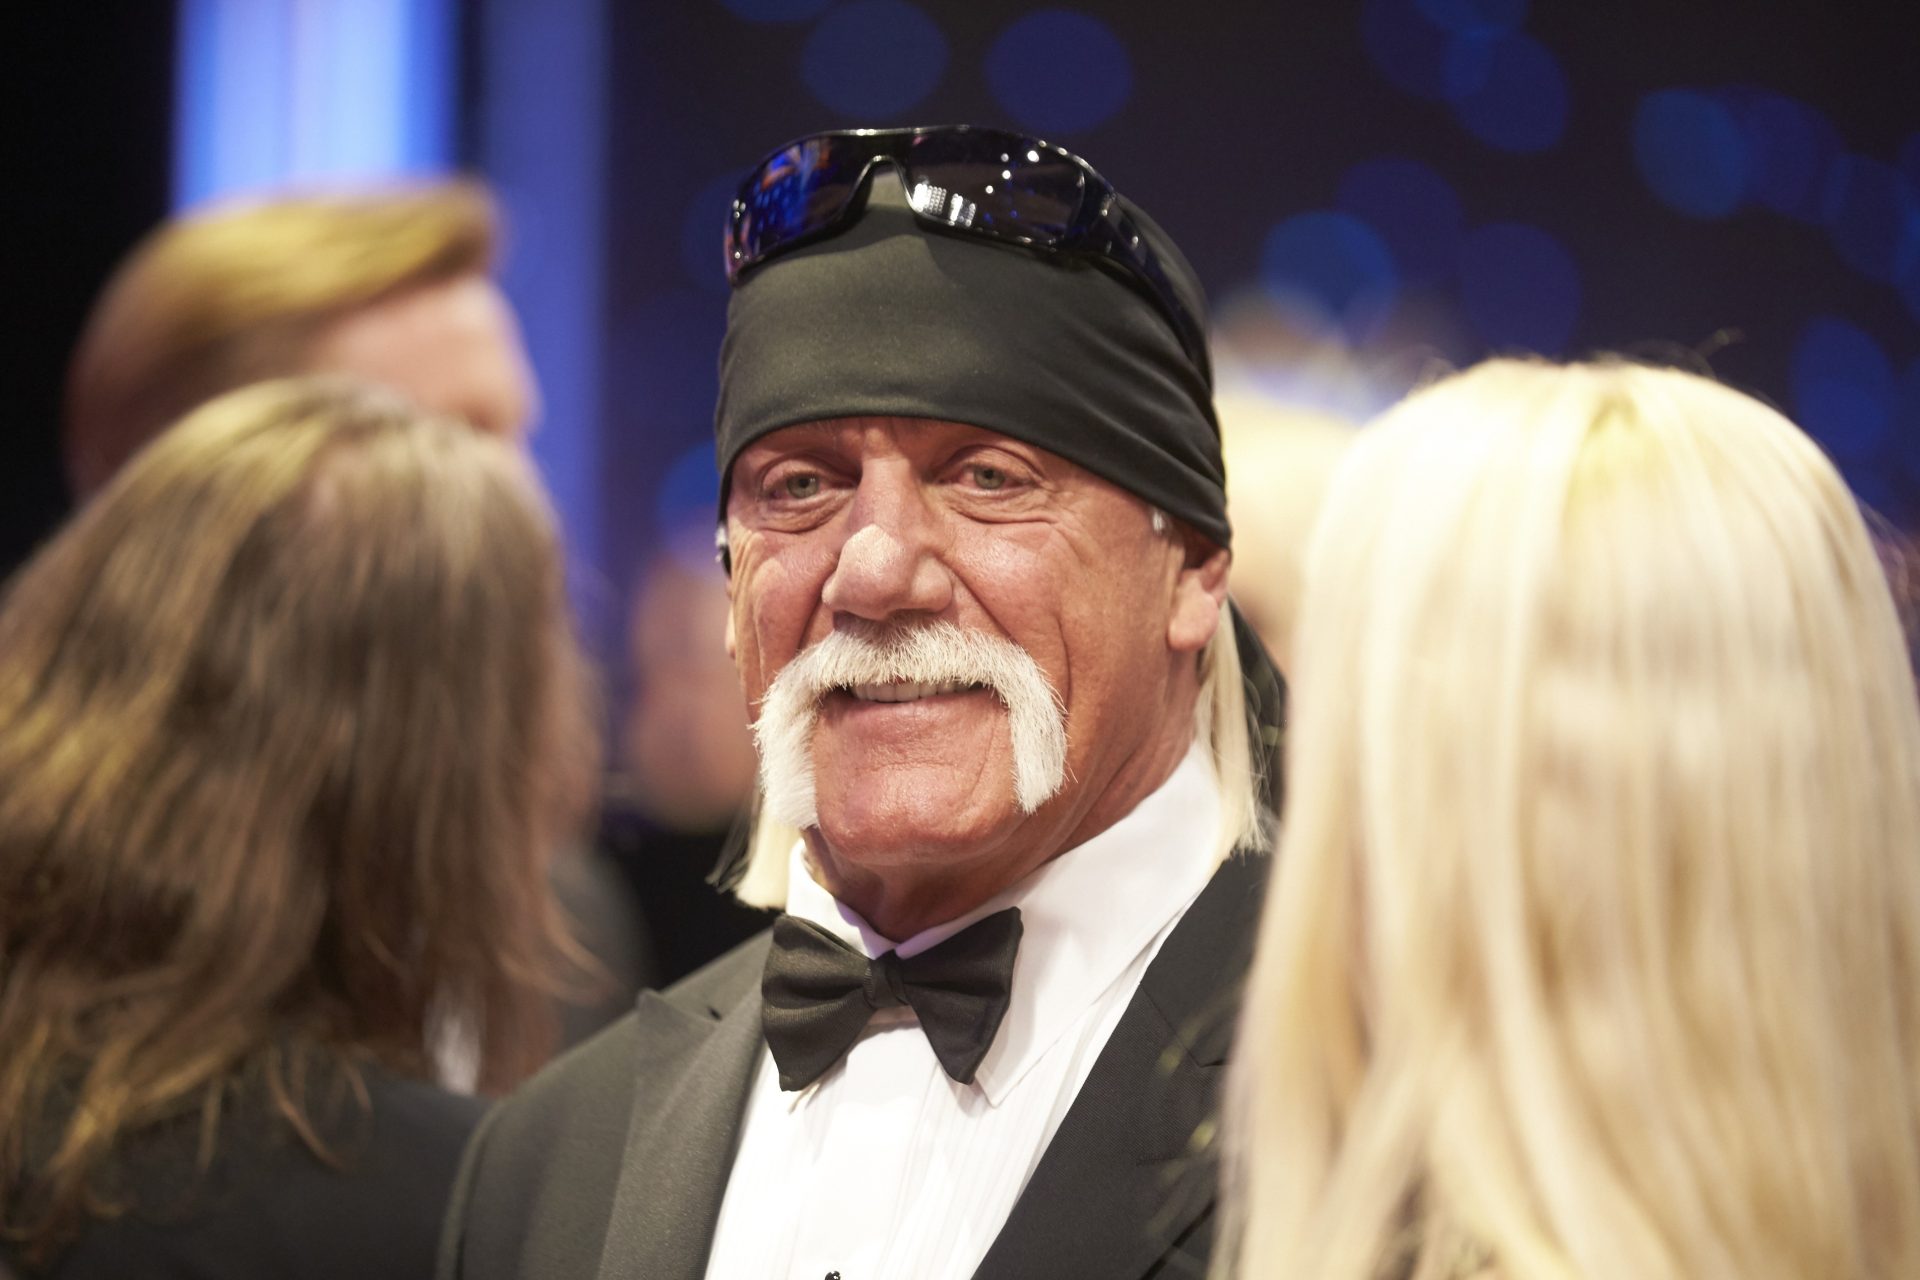 Hulk Hogan and the 'big regret' from his iconic wrestling career